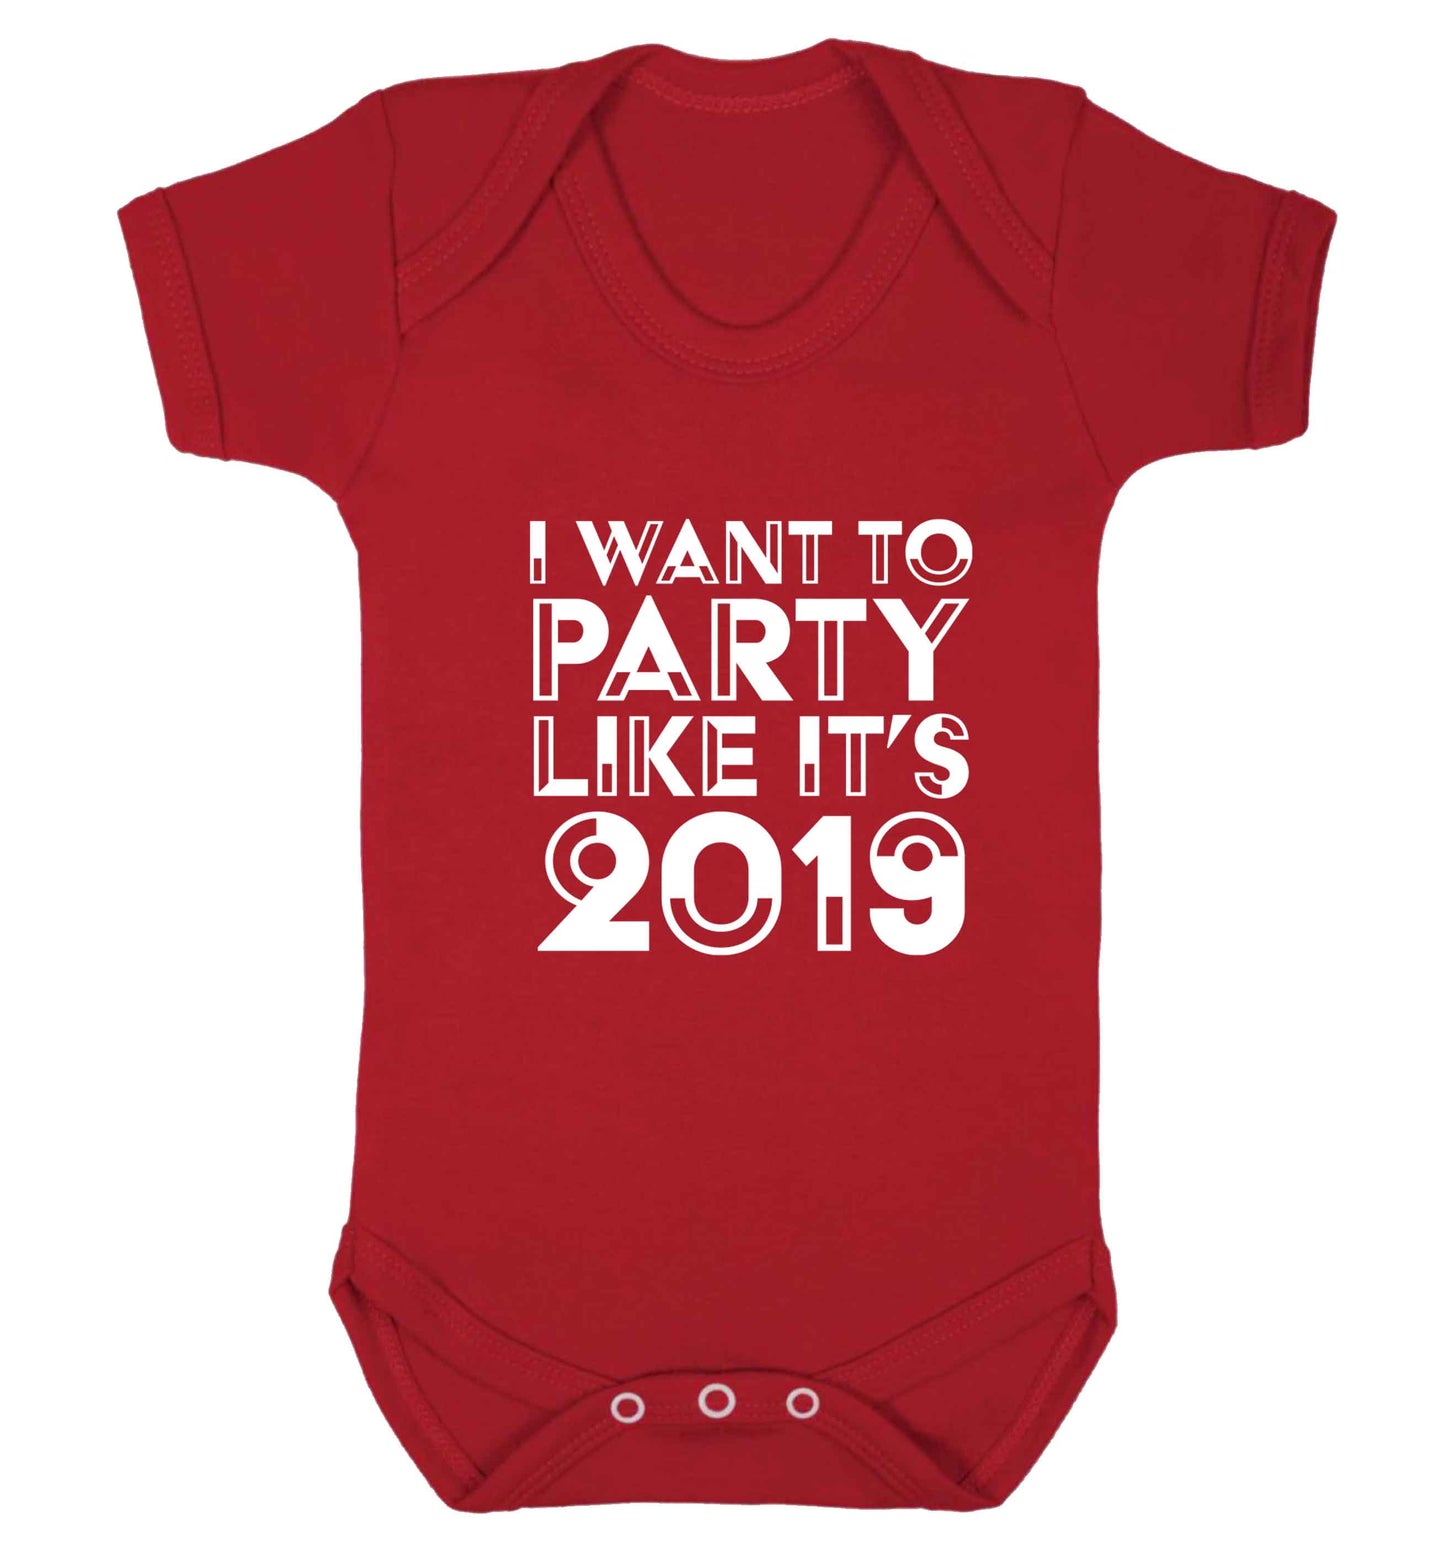 I want to party like it's 2019 baby vest red 18-24 months